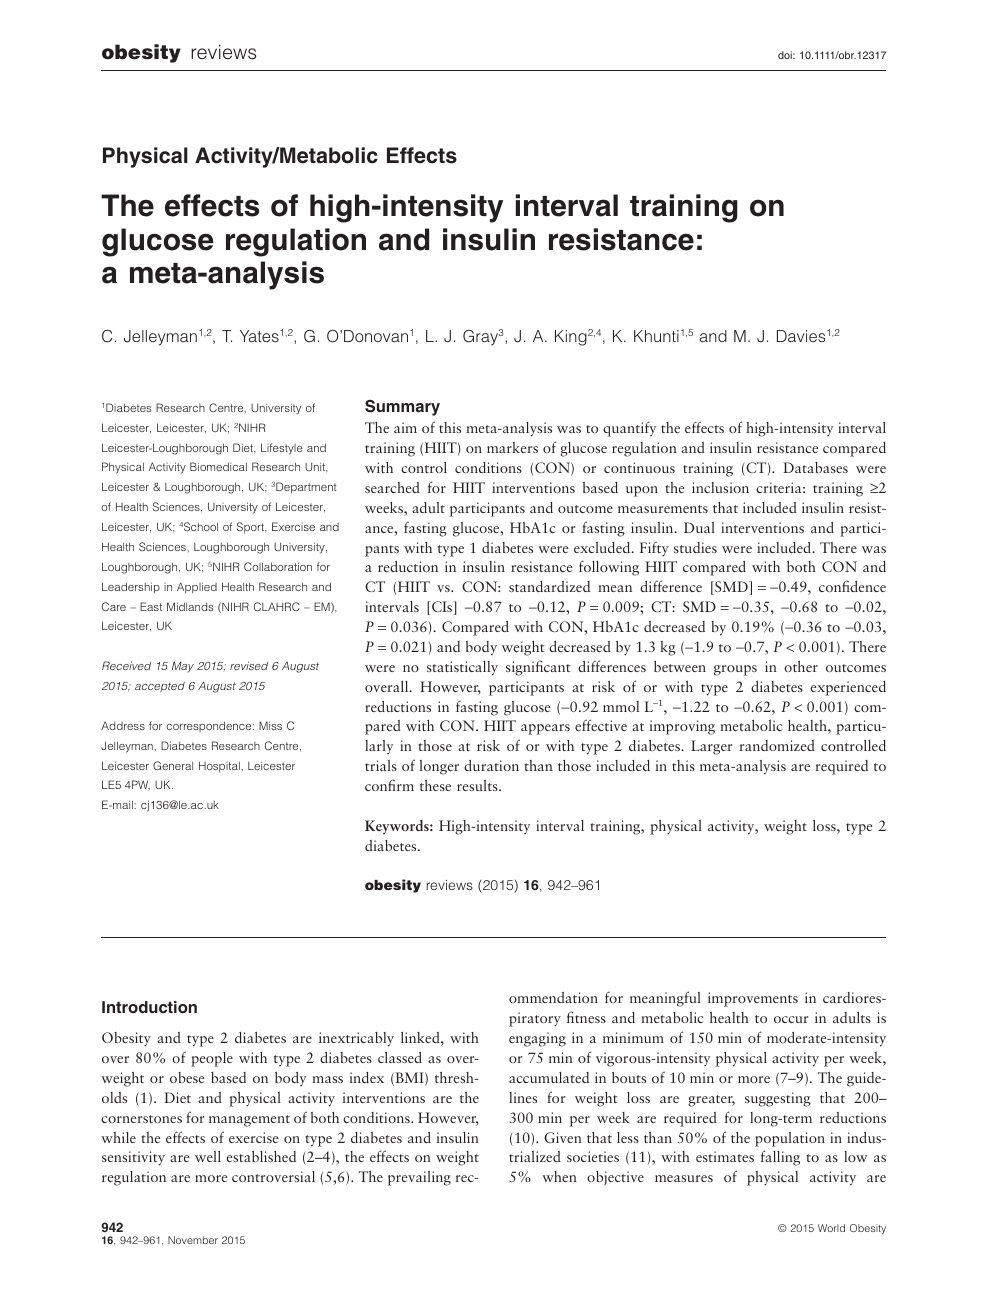 The Effects Of High Intensity Interval Training On Glucose Regulation And Insulin Resistance A Meta Analysis Topic Of Research Paper In Health Sciences Download Scholarly Article Pdf And Read For Free On Cyberleninka